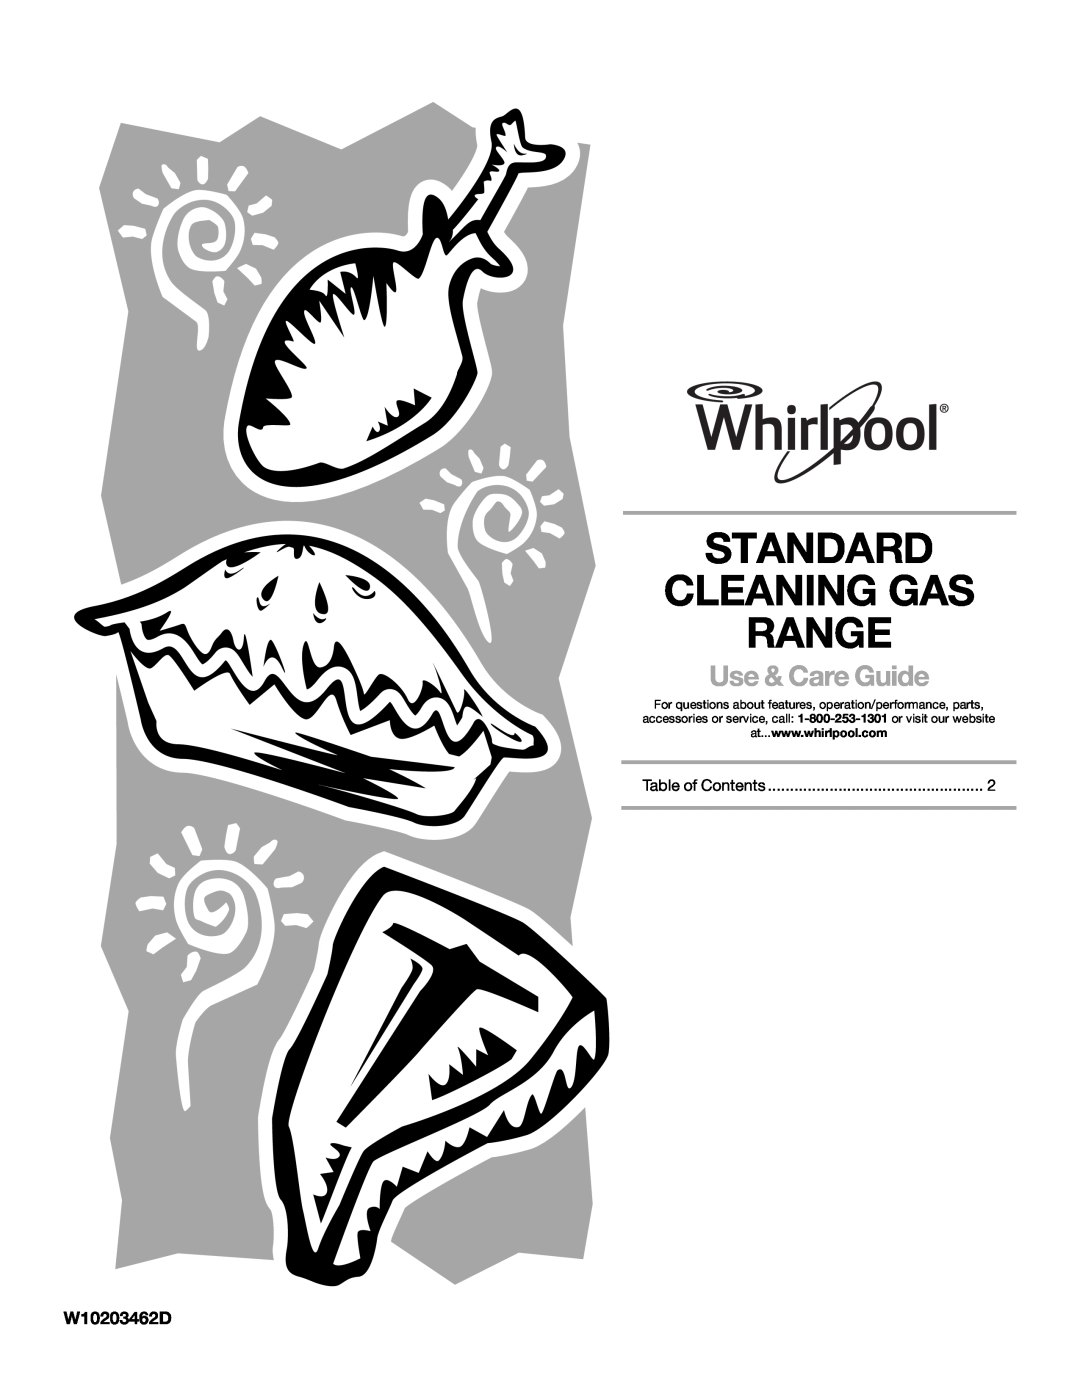 Whirlpool W10203462D manual Standard Cleaning Gas Range, Use & Care Guide 